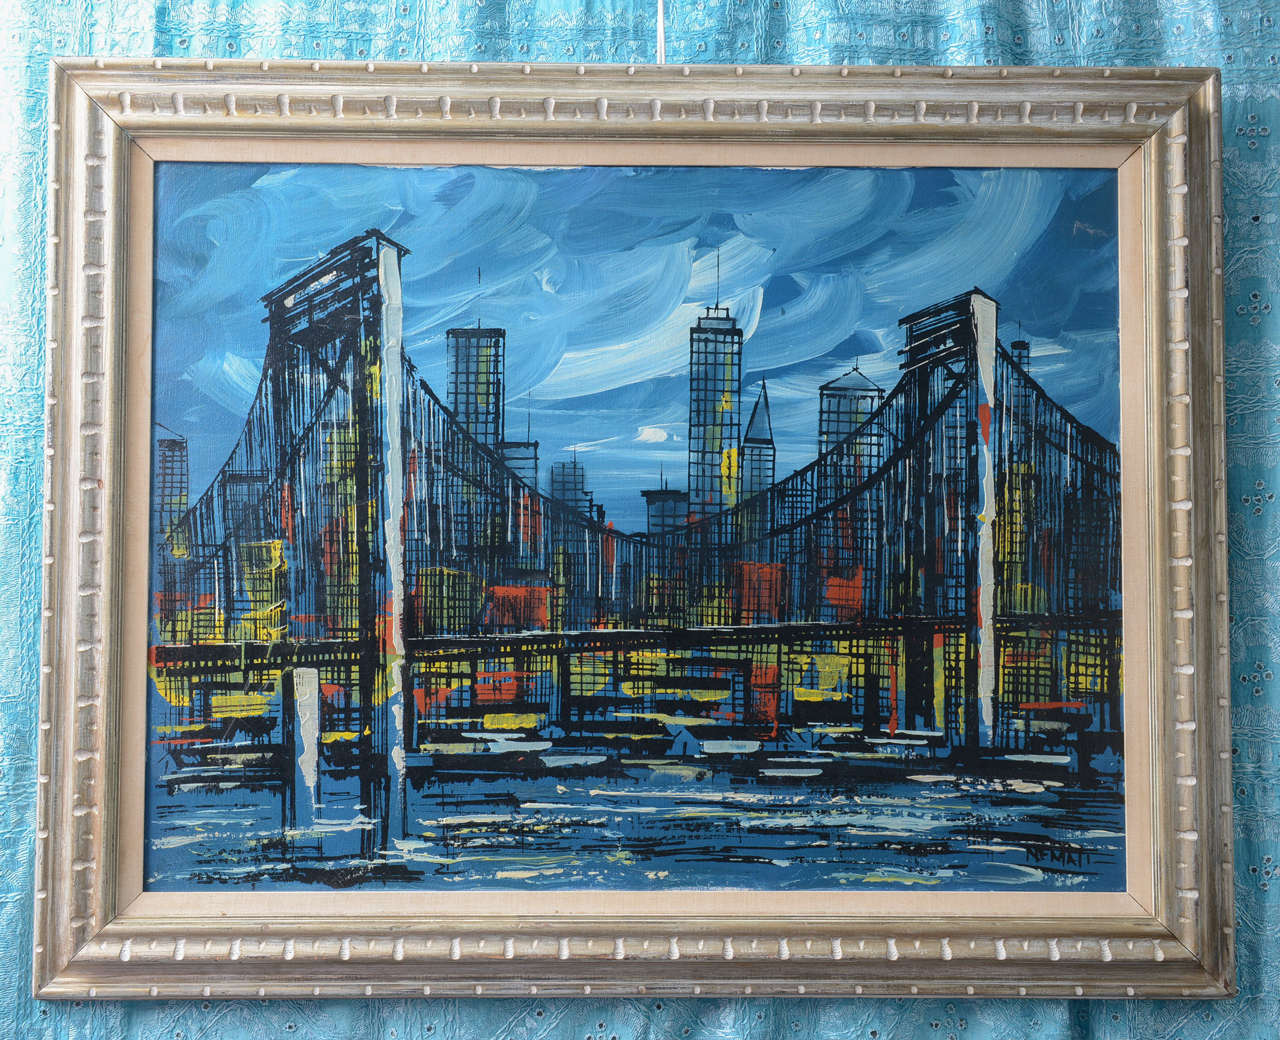 Pretty mid-century modern painting of the Manhattan Bridge in New York City.  The scene of the Manhattan skyline beyond the bridge brings to mind the New York of Audrey Hepburn and Frank Sinatra. This painting includes the iconic Chrysler and Empire